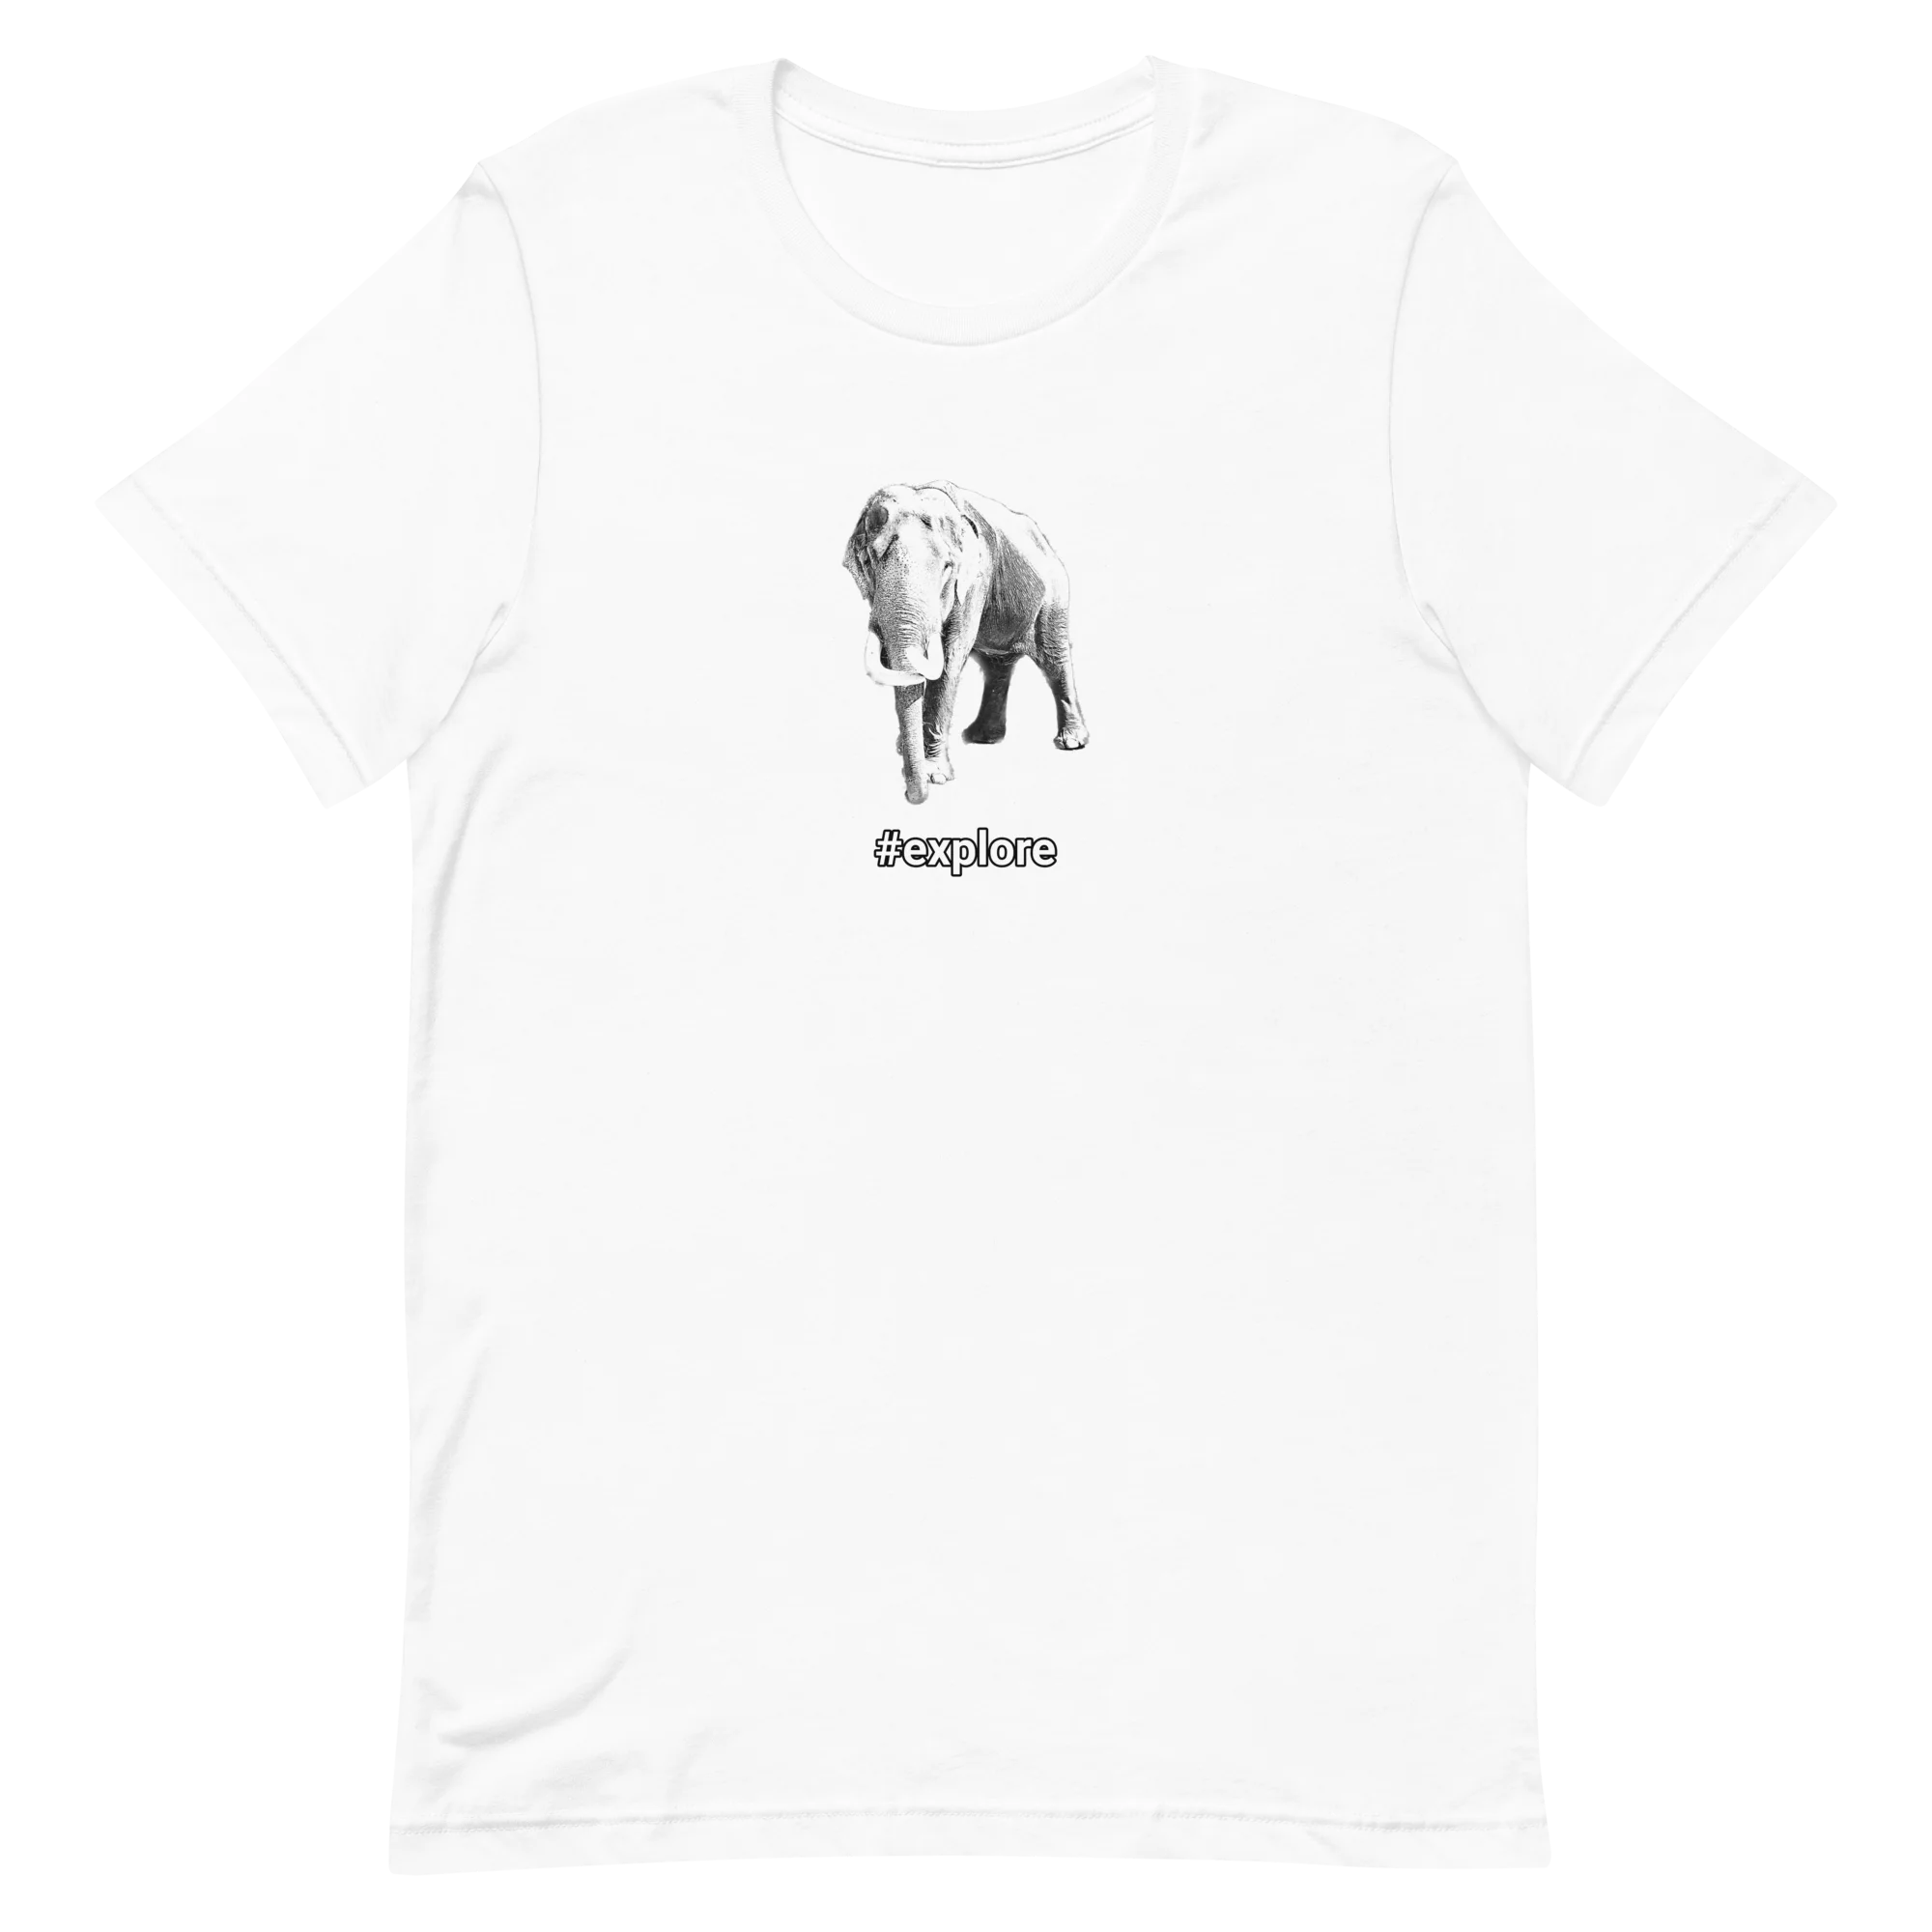 T-Shirt featuring an image of a elephant